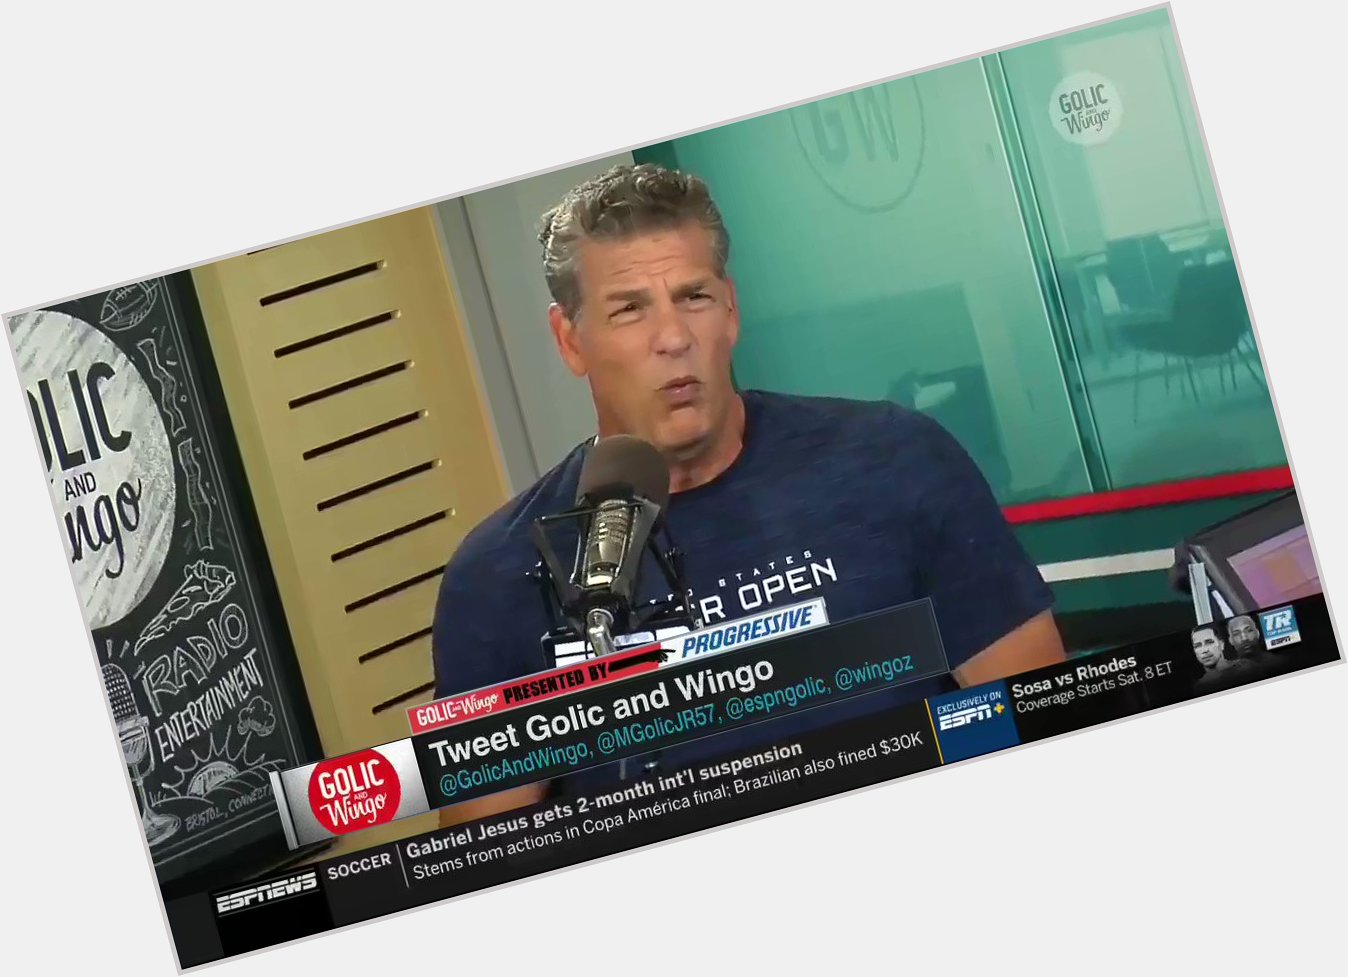 Sam Darnold declined to wish Tom Brady a Happy Birthday citing competitiveness. 

Golic s reaction 